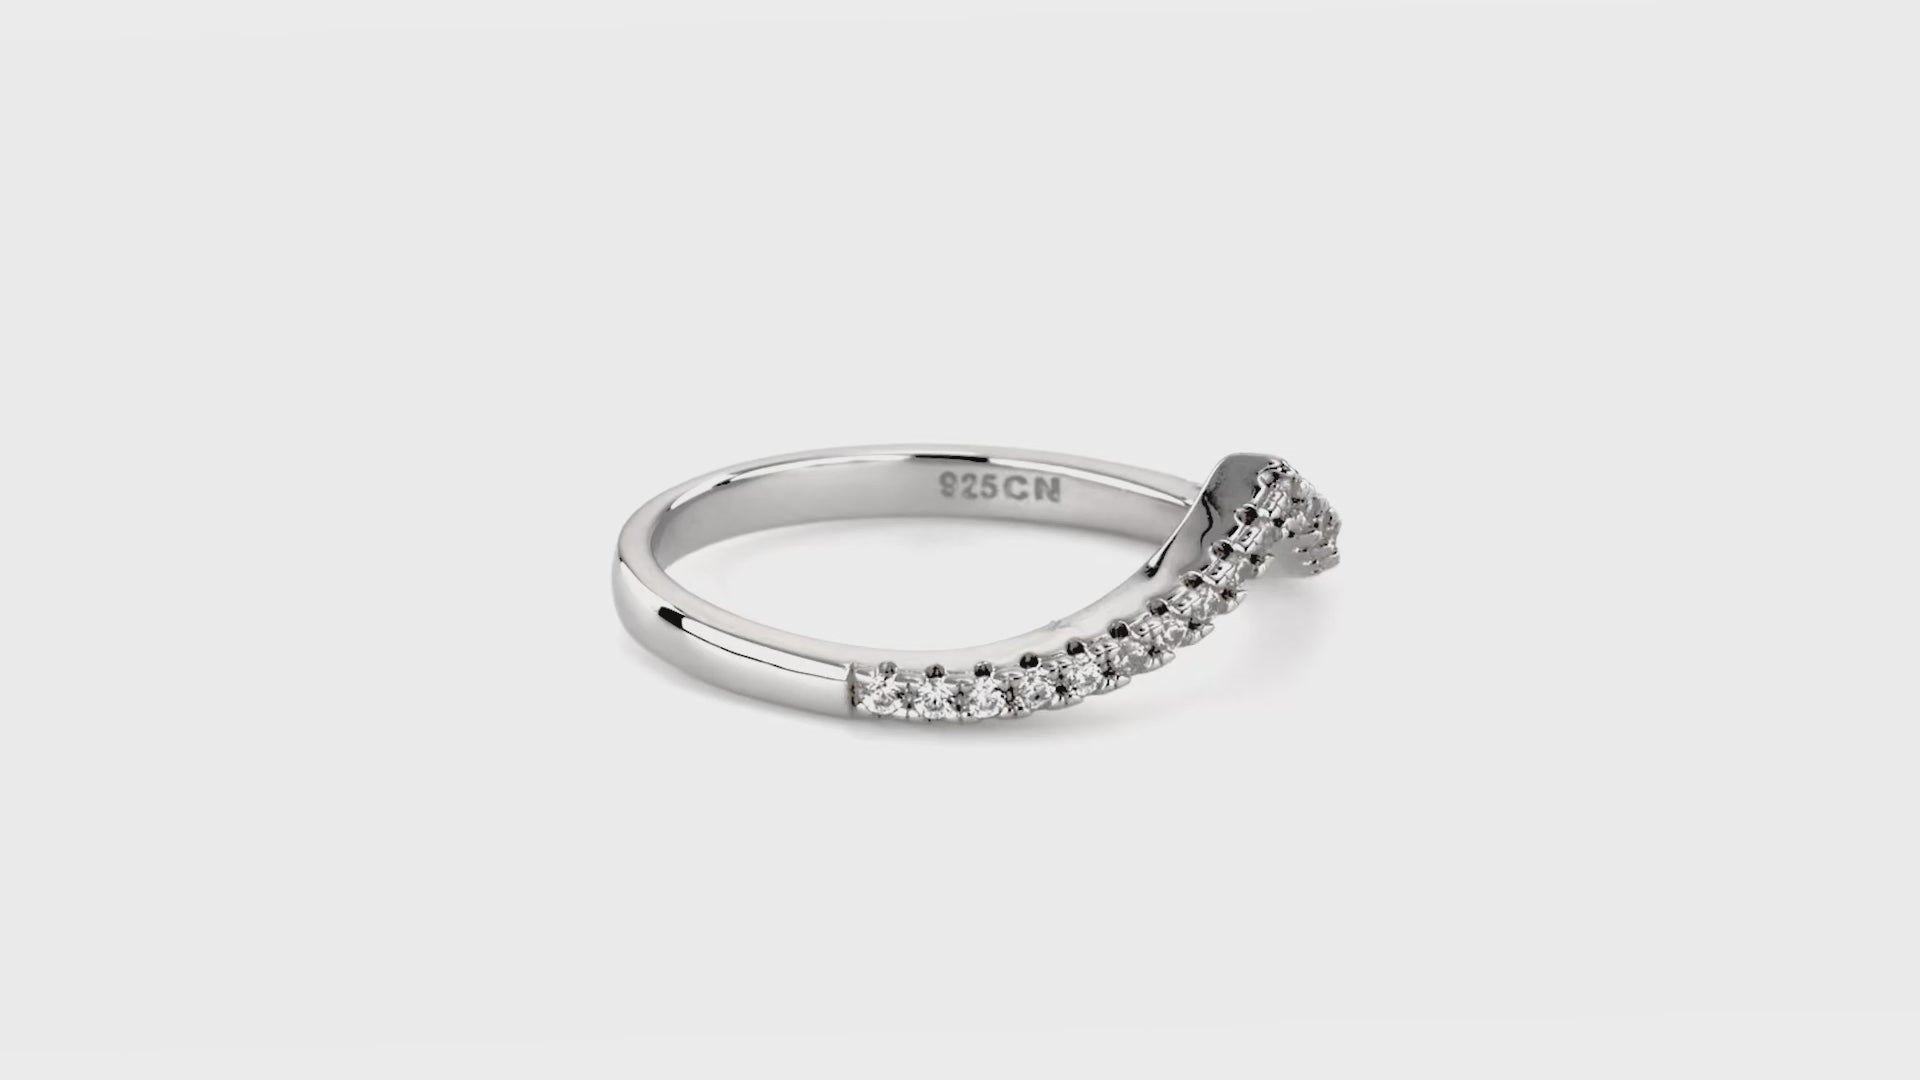 Video Contains Wishbone CZ Curved Half Eternity Ring in Sterling Silver. Style Number R1253-B